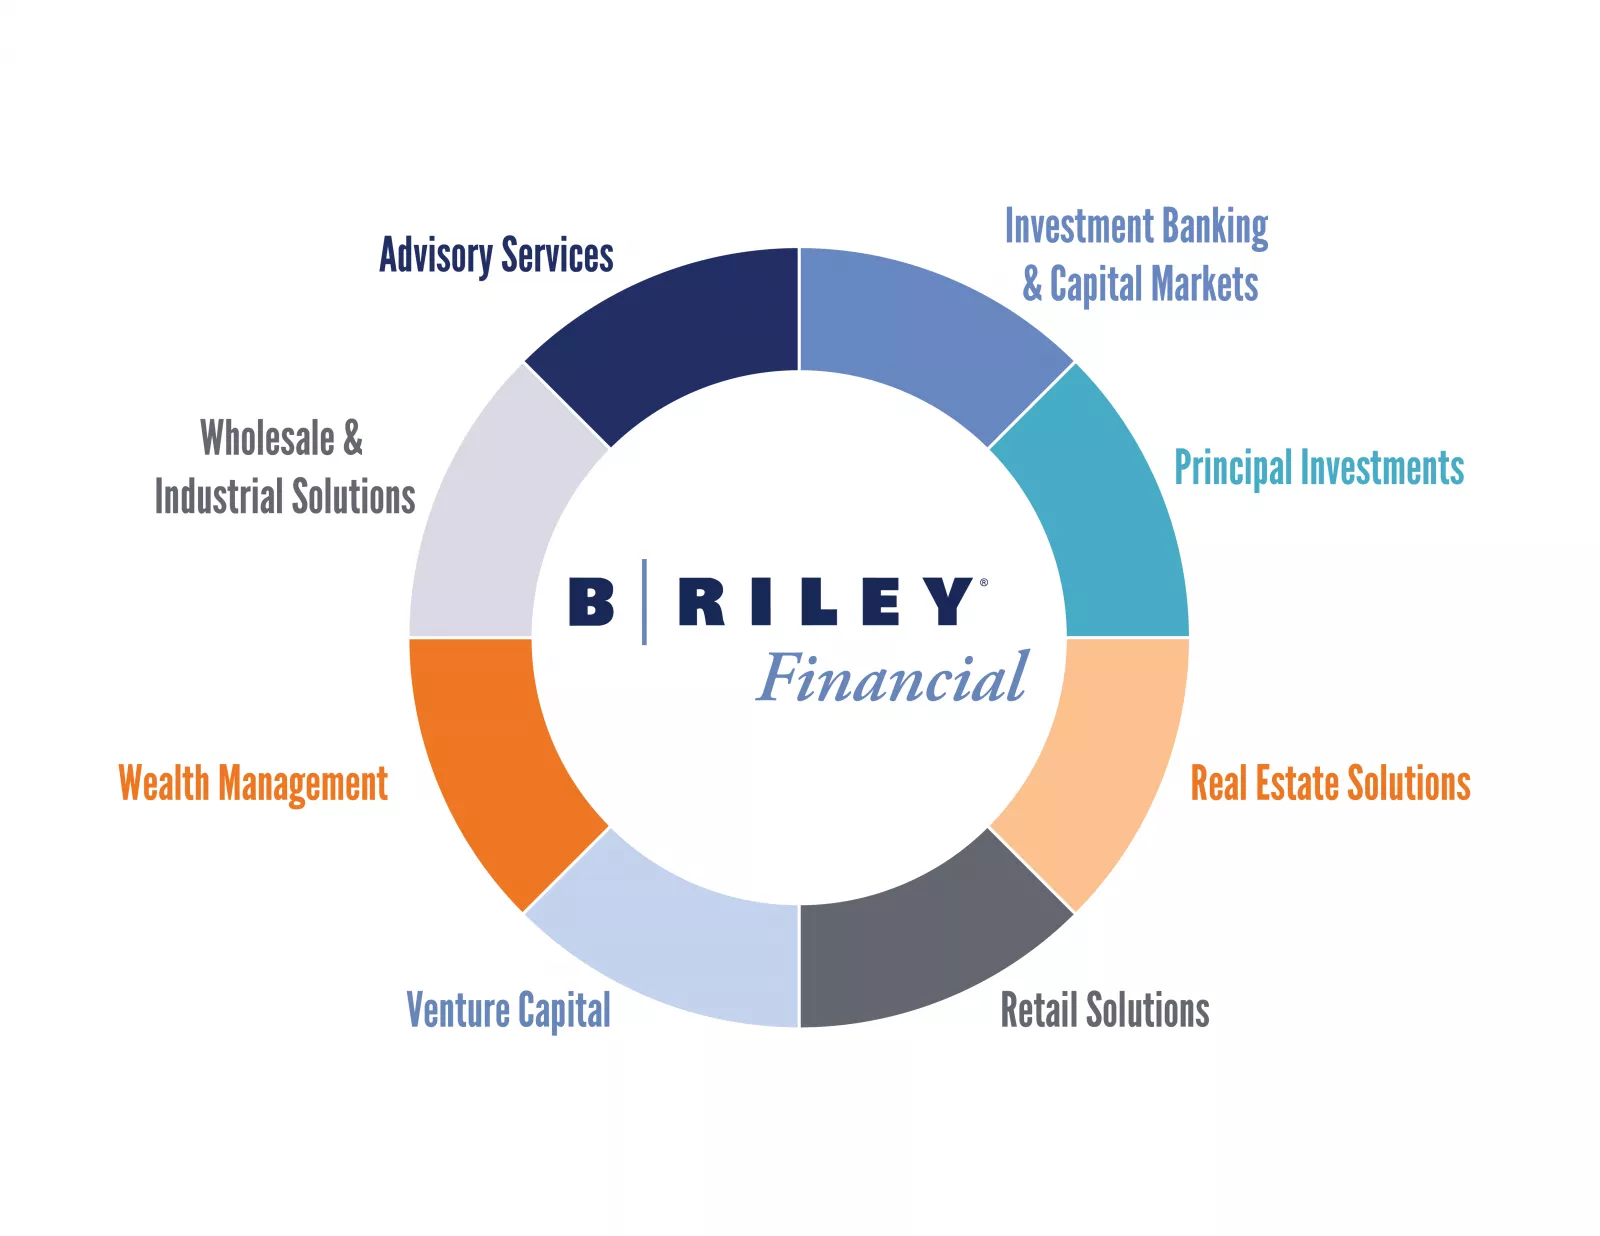 B. Riley financial service and business capabilities